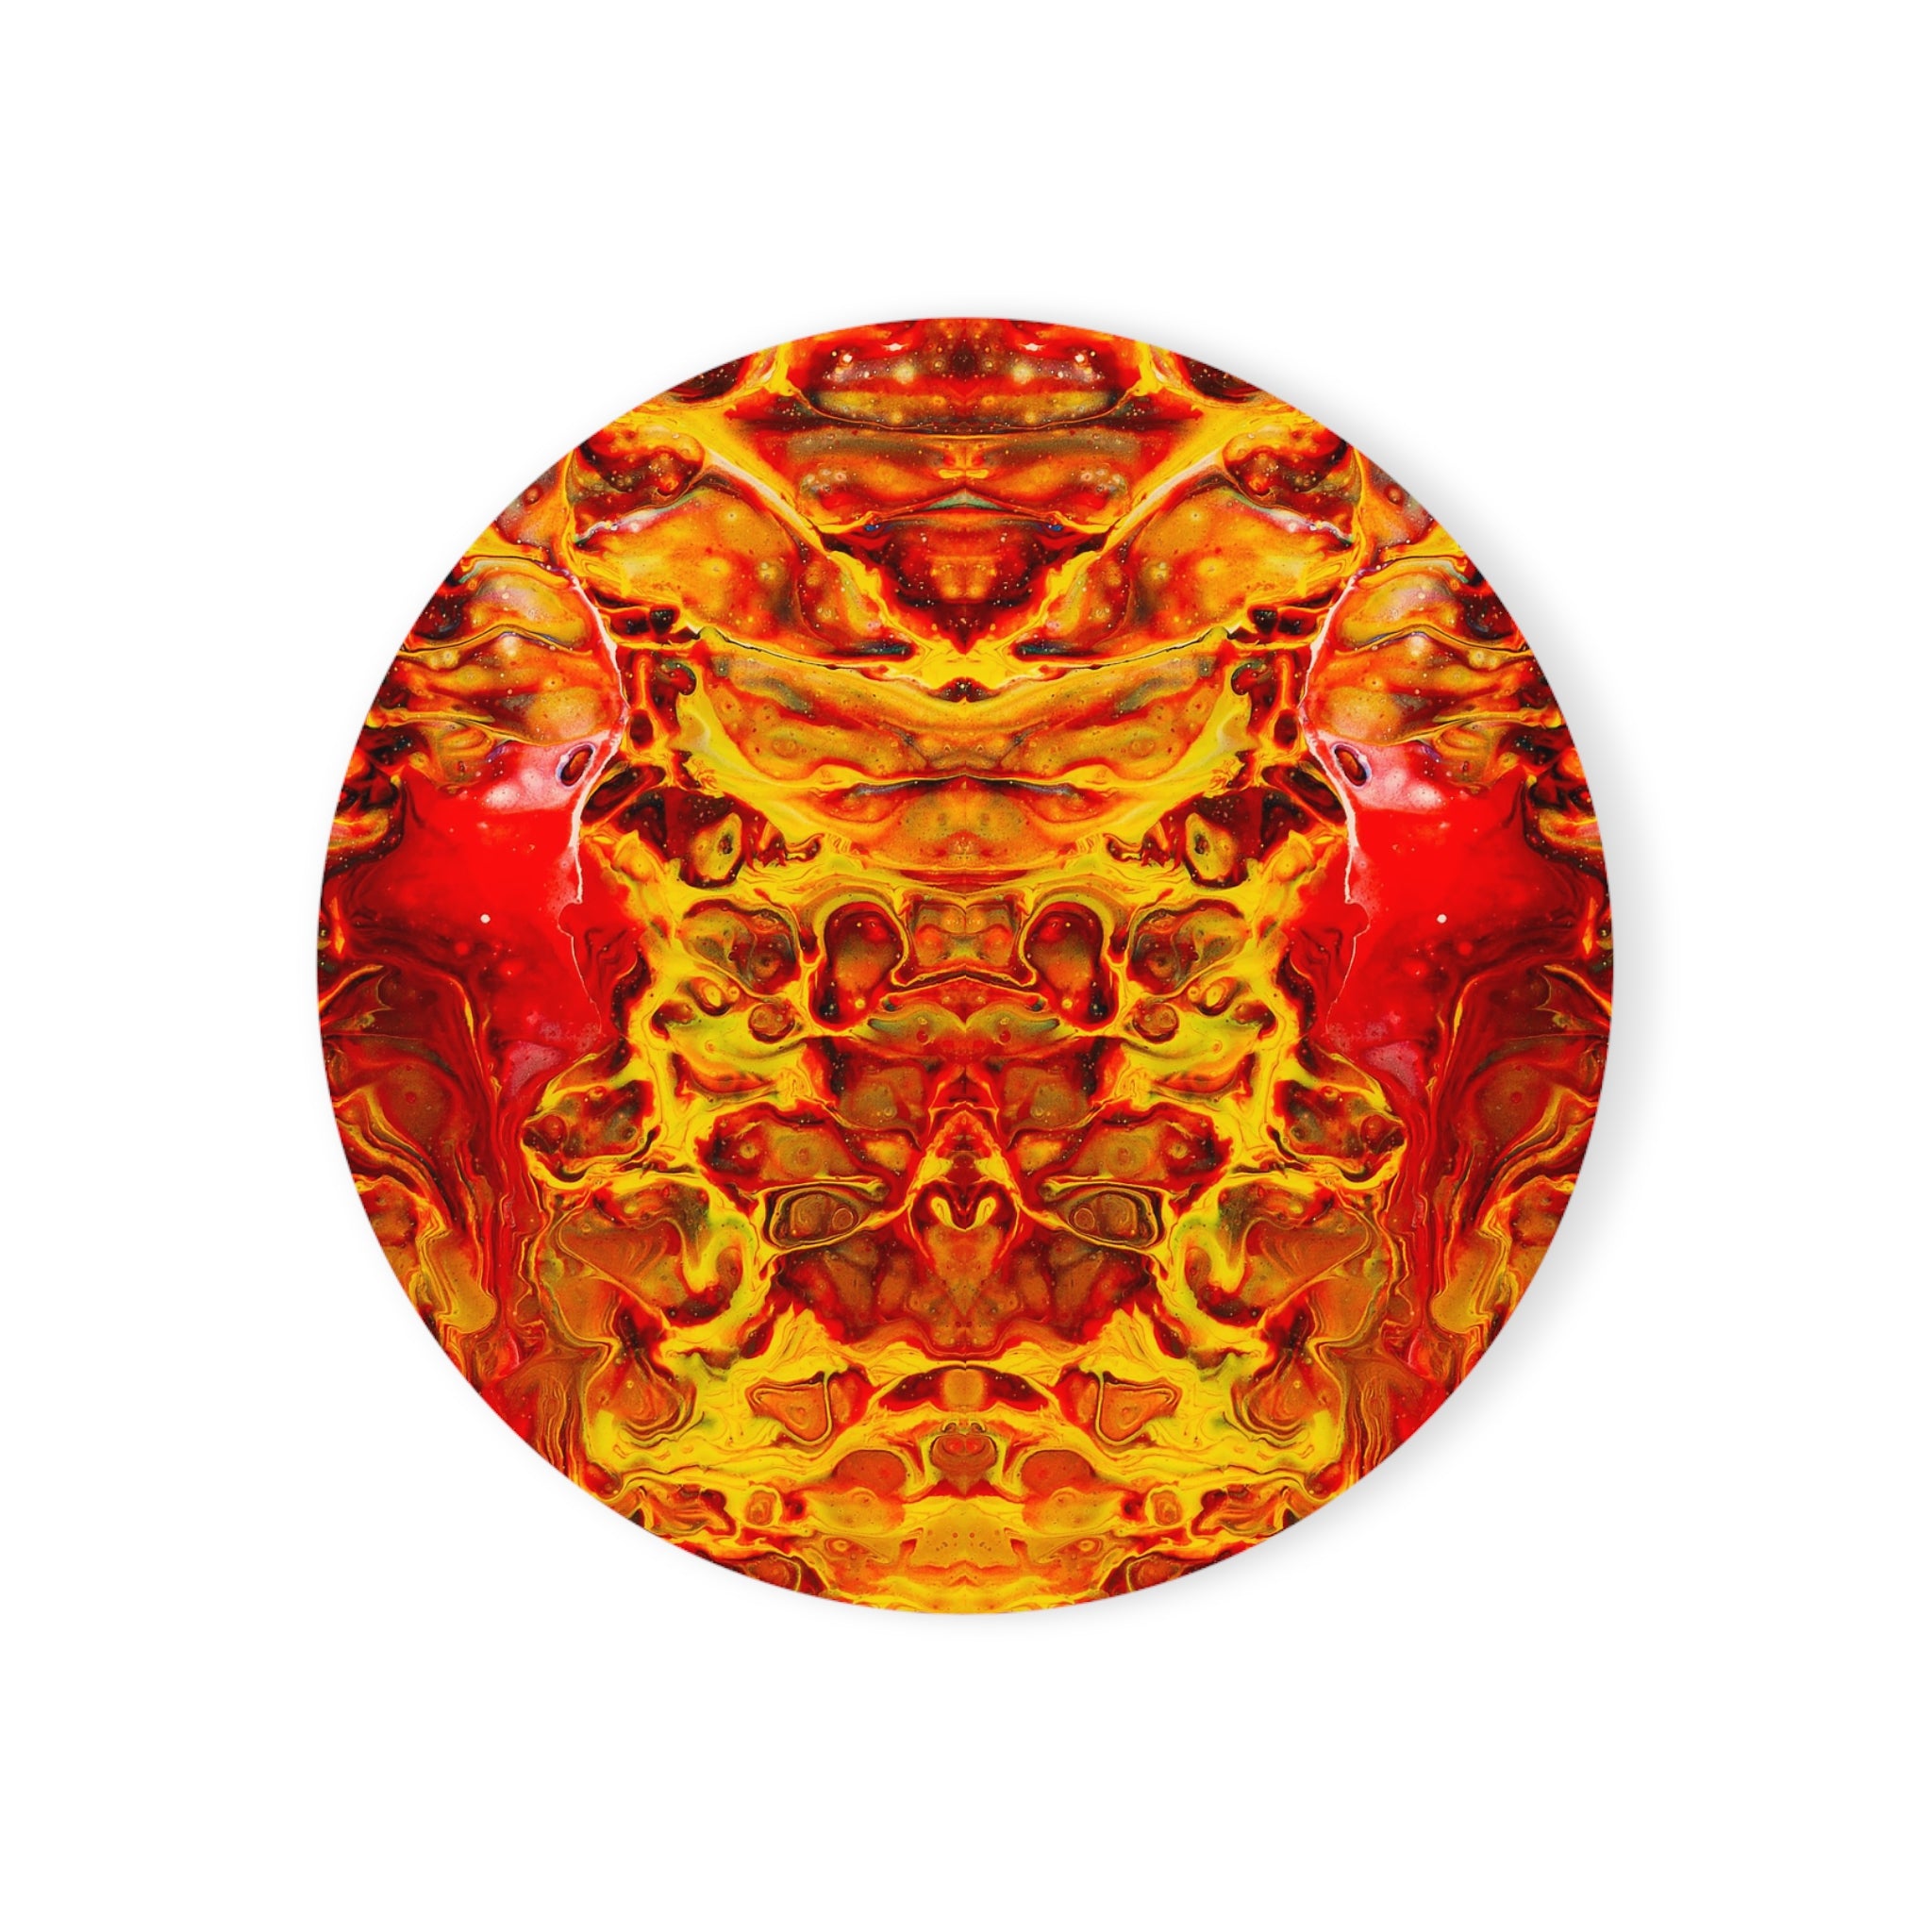 Cameron Creations - Fire Within - Stylish Coffee Coaster - Circle Front